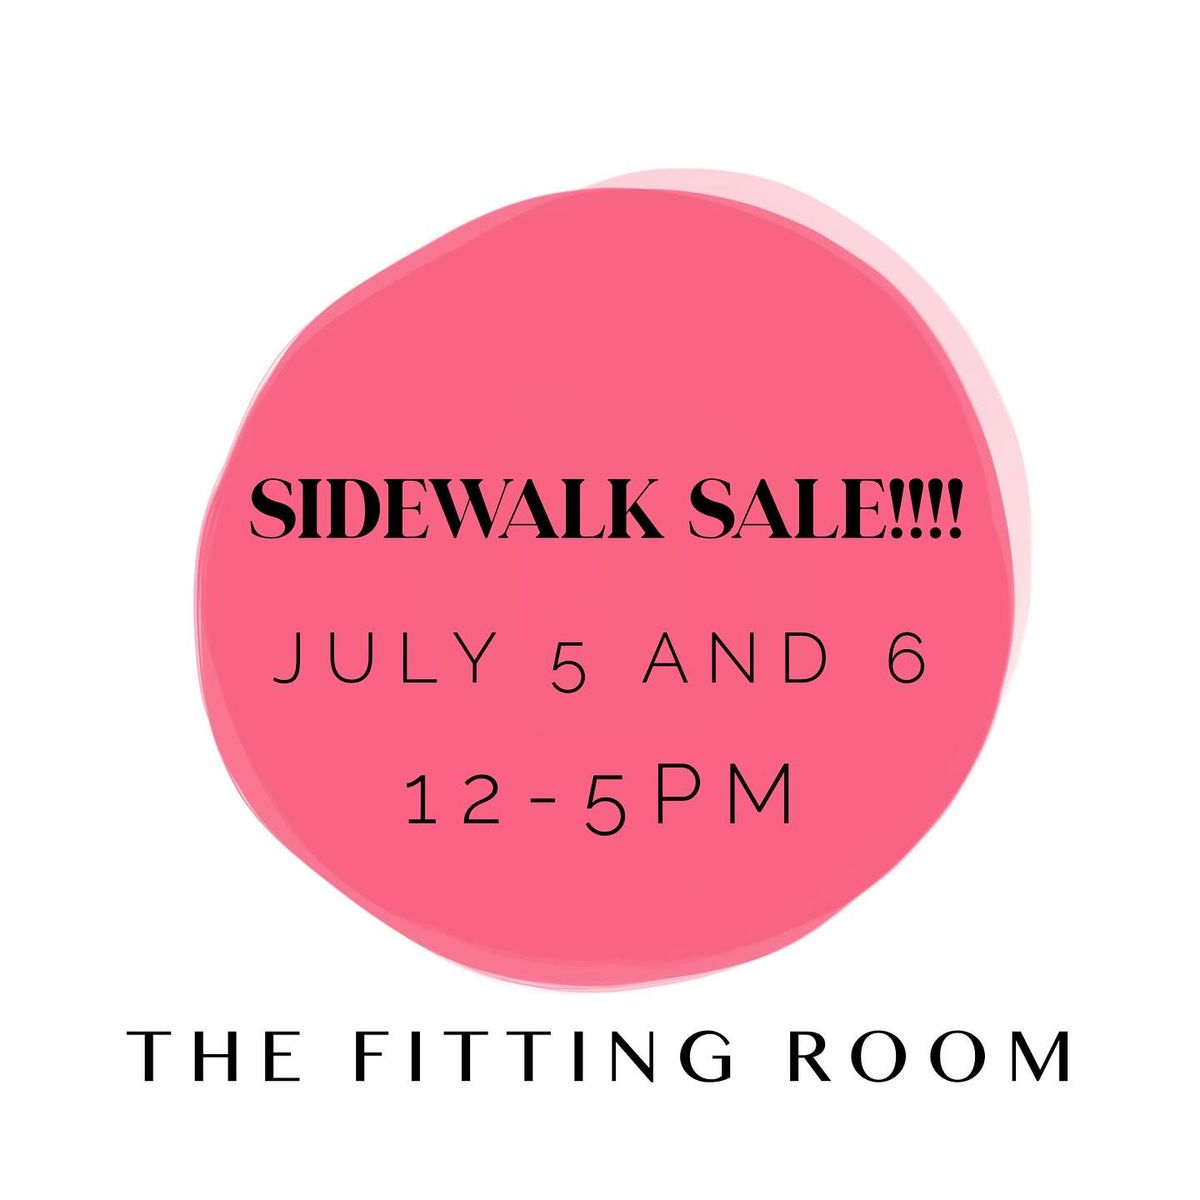 SIDEWALK SALE at The Fitting Room